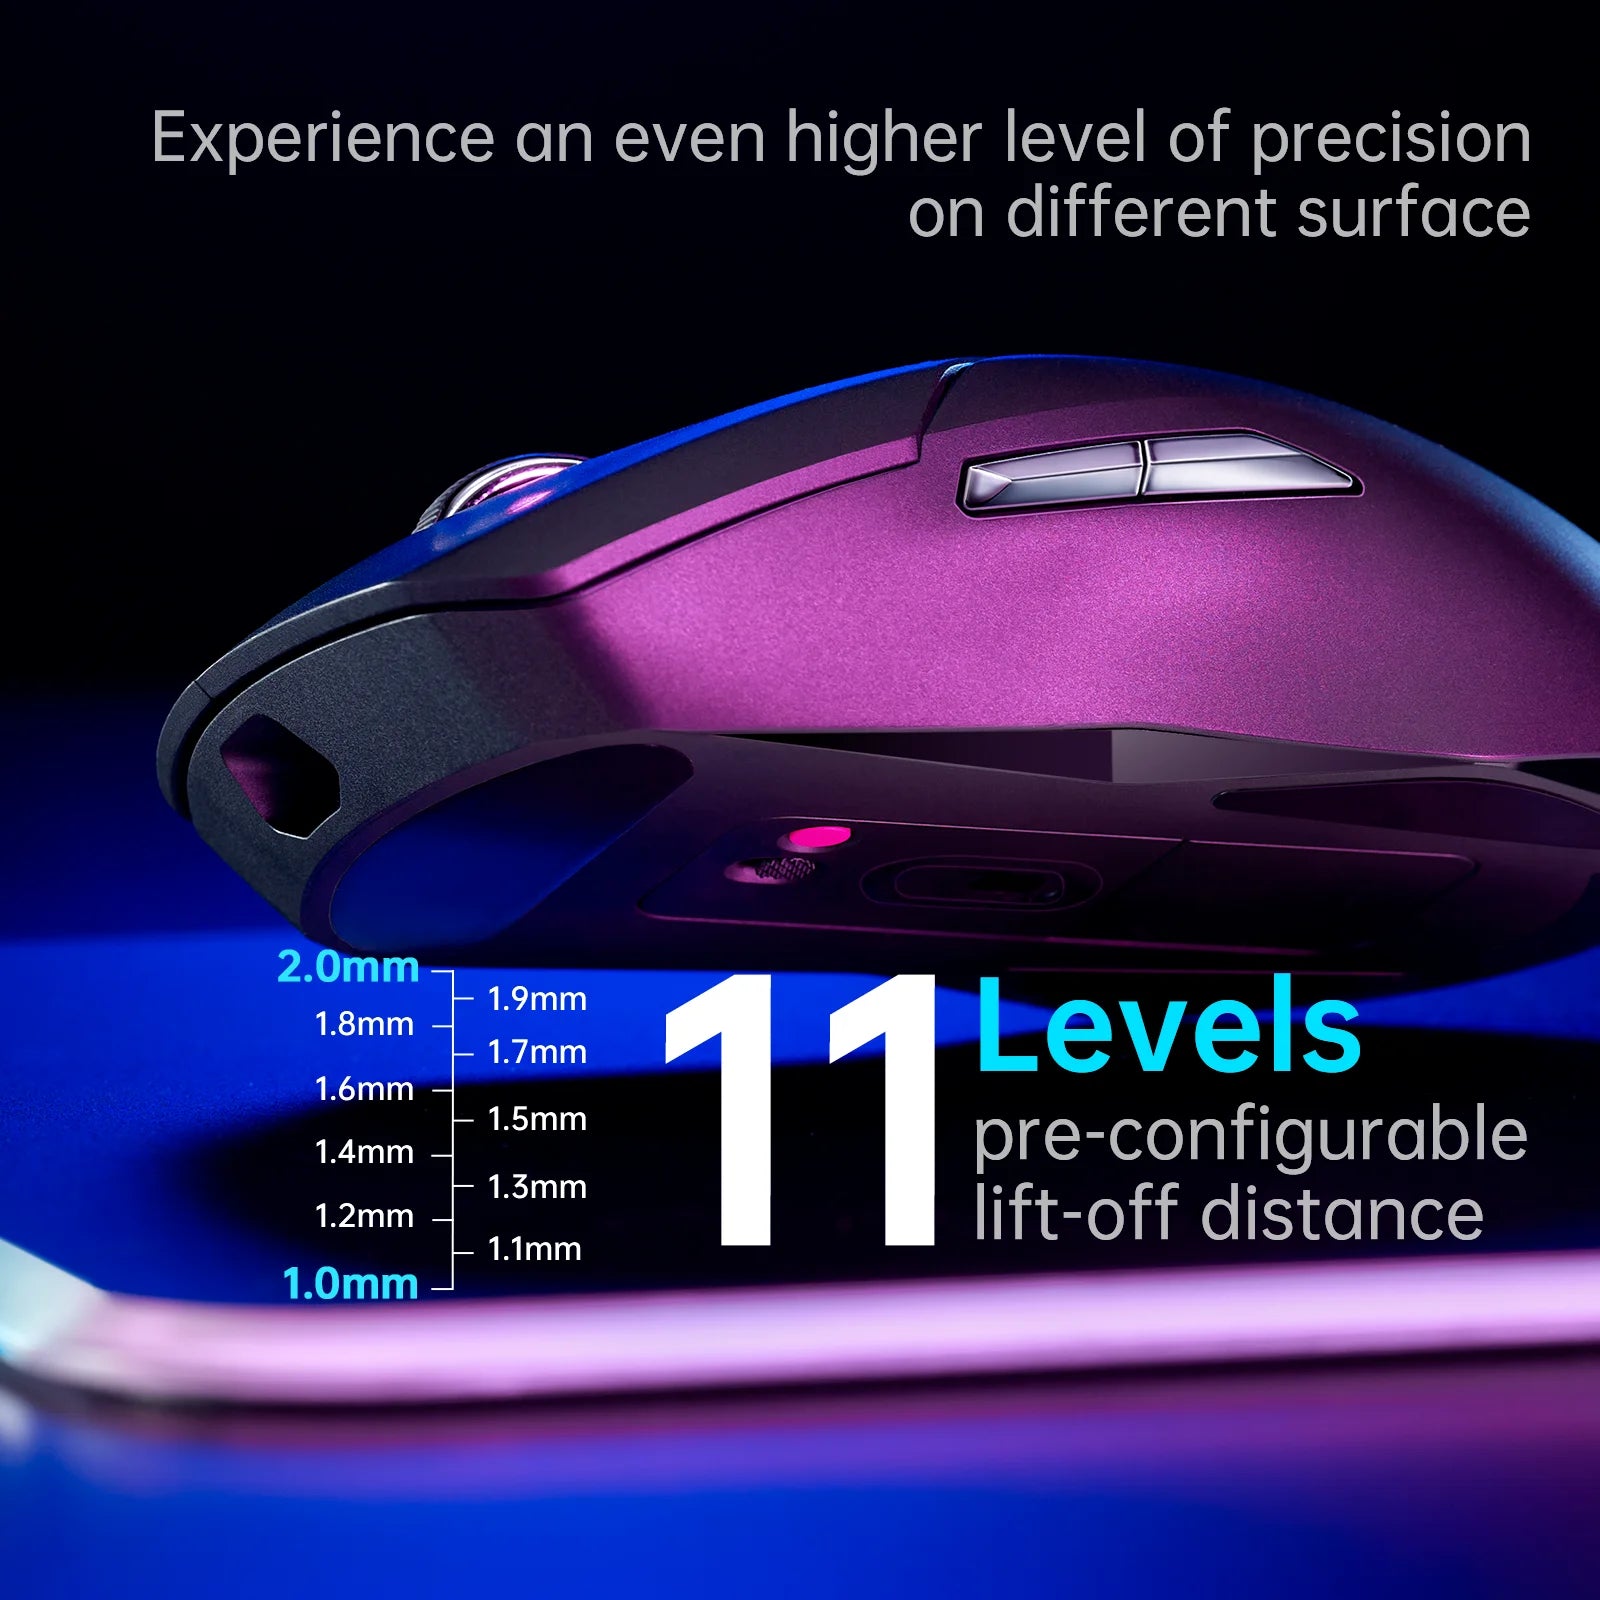 Rapoo VT9PRO Wireless Gaming Mouse Esports Grade 68g Ultra-Light 26000DPI 8 Buttons Optical PAW3398 Computer Mouse For Laptop PC